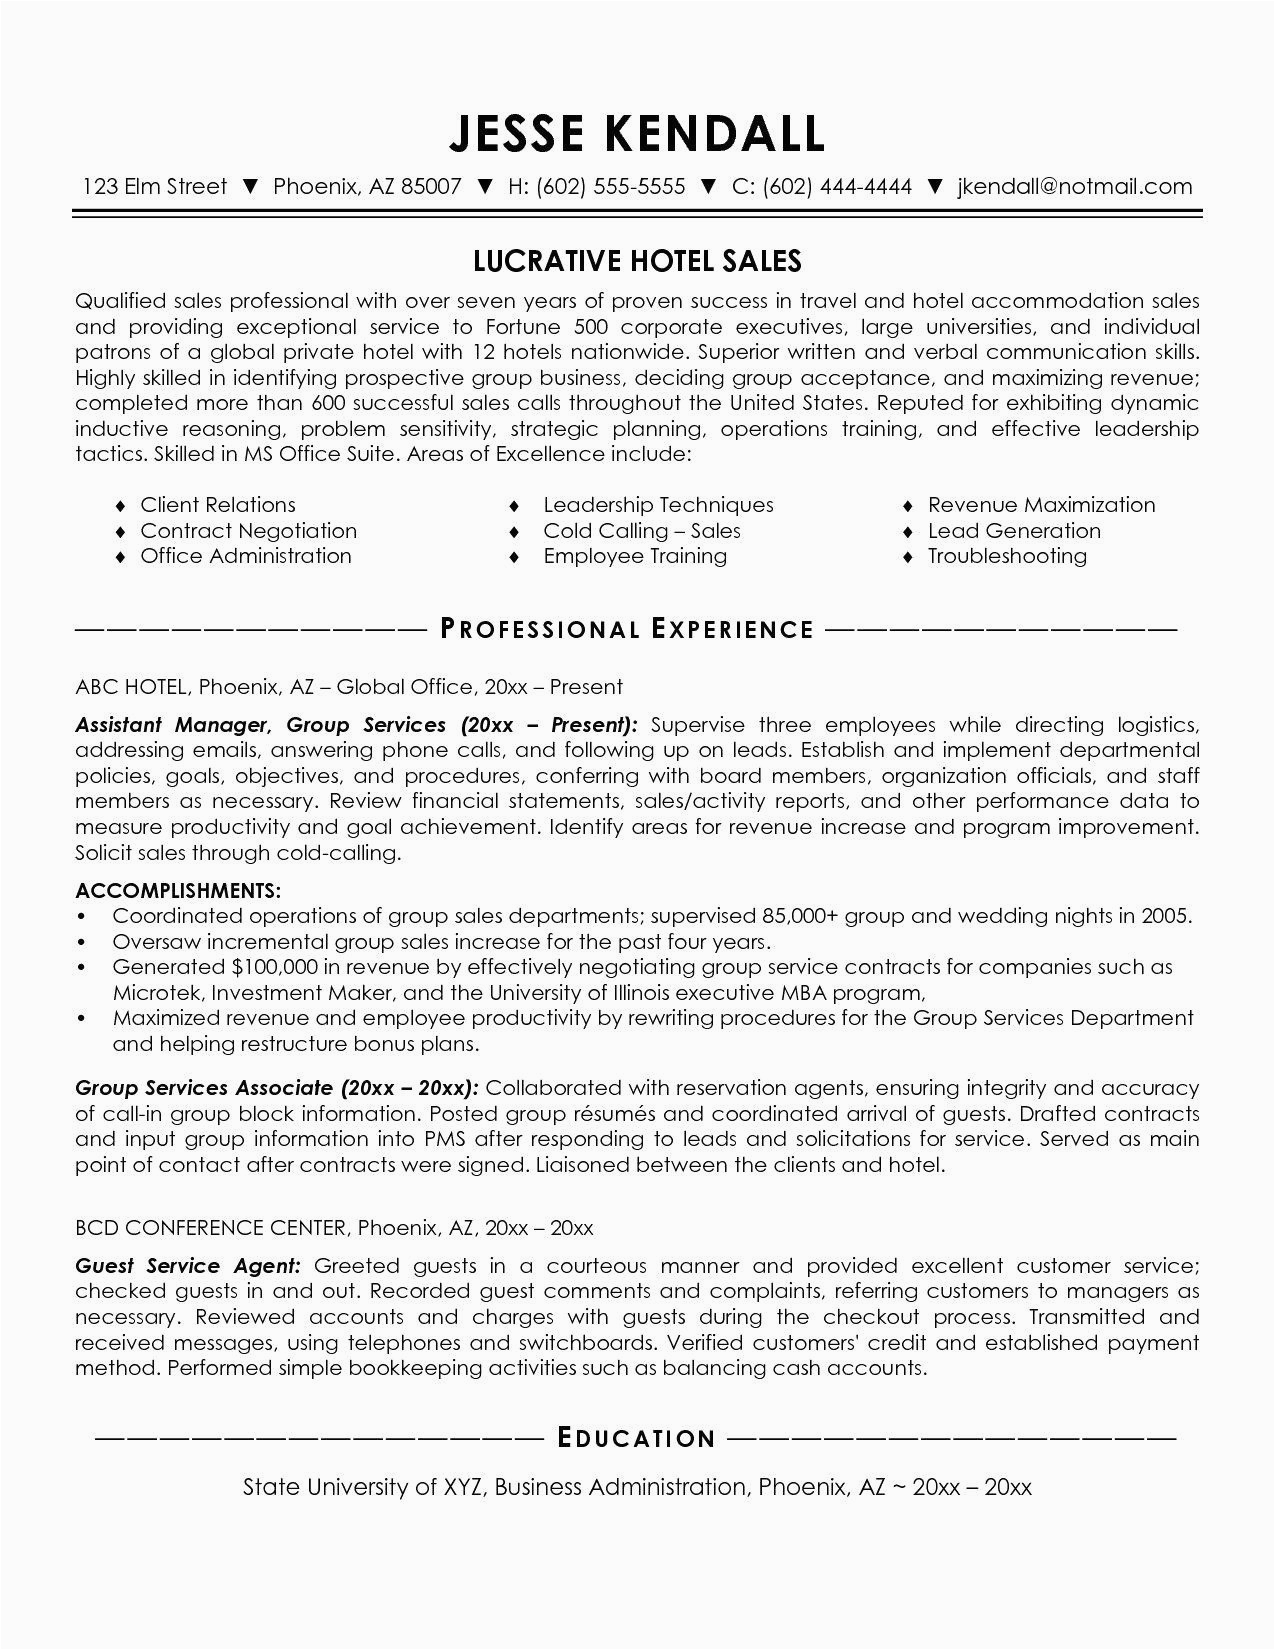 Sample Of Full Block Style Resume √ 20 Hotel Sales Manager Resume In 2020 with Images